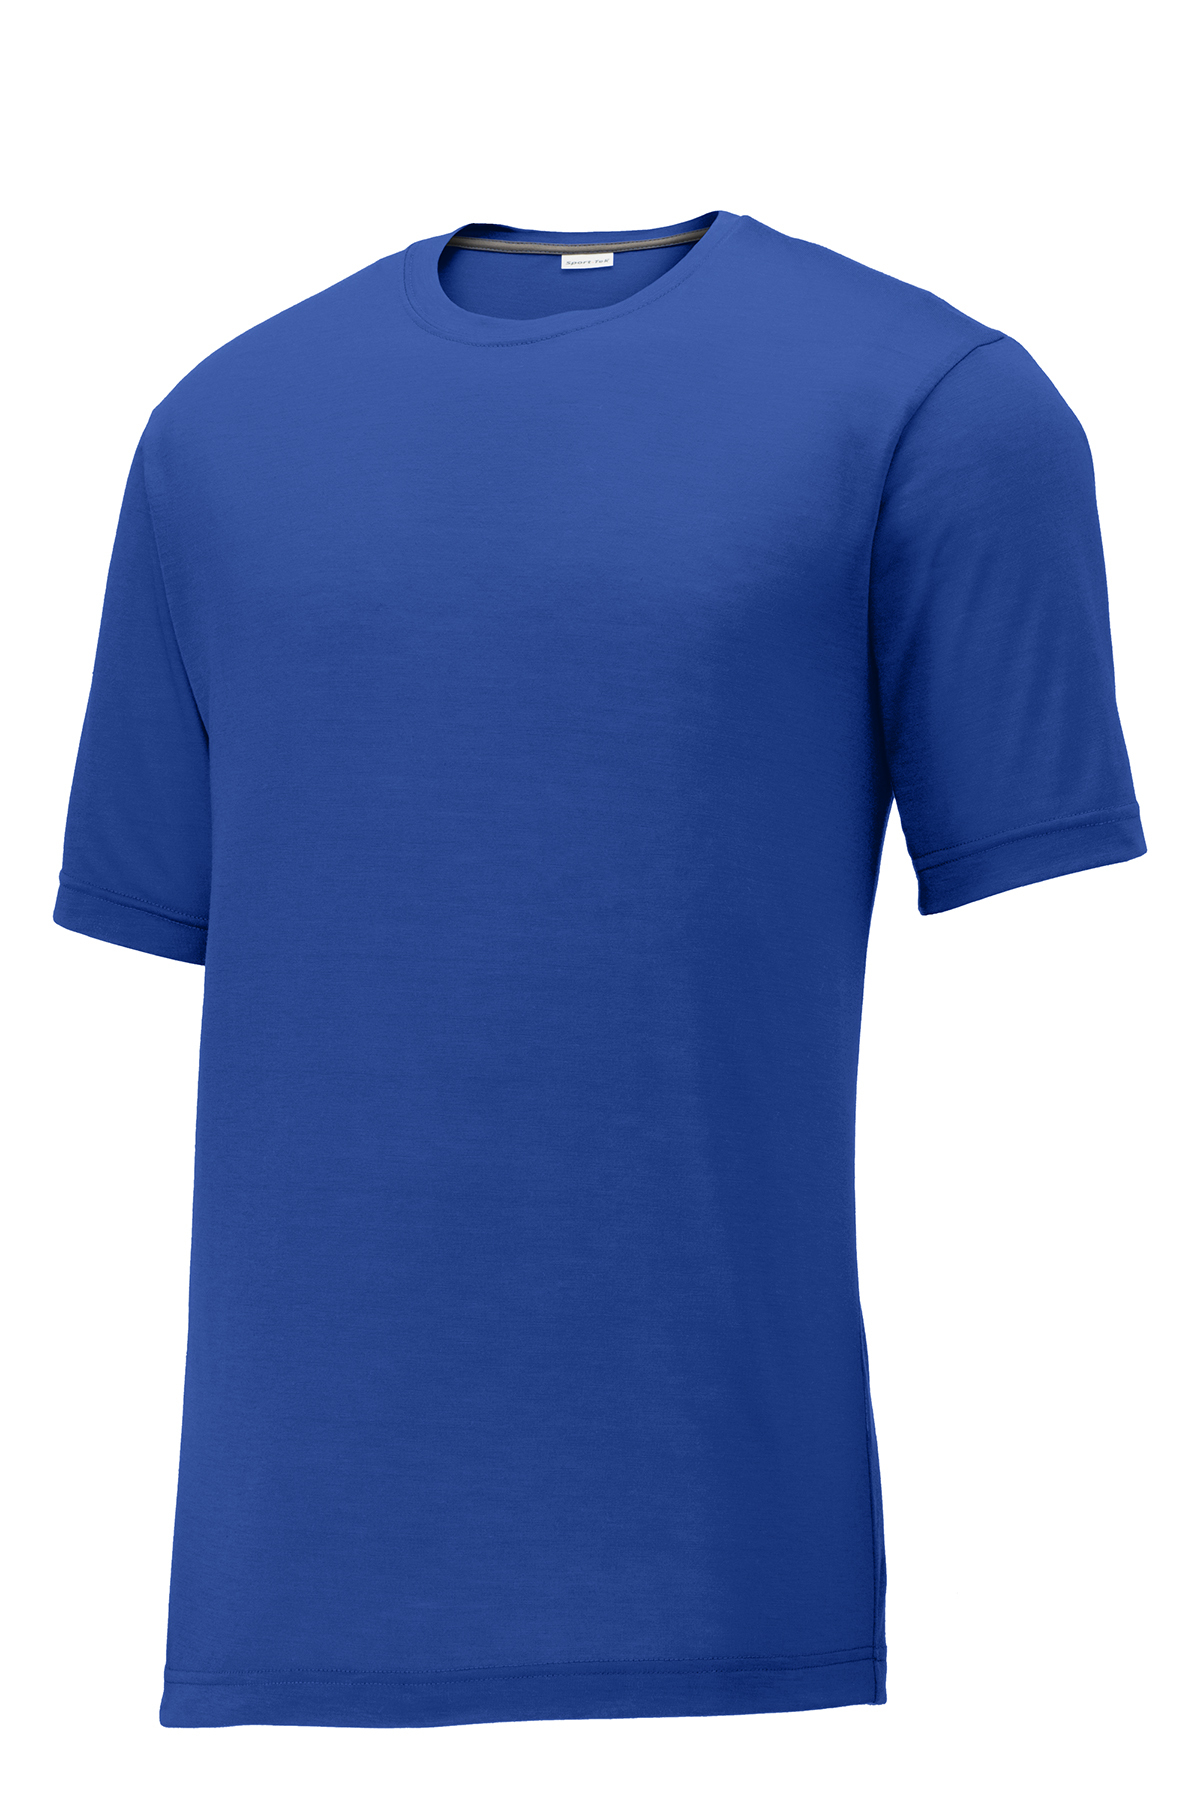 Sport-Tek PosiCharge Competitor™ Cotton Touch™ Tee | Product | Sport-Tek